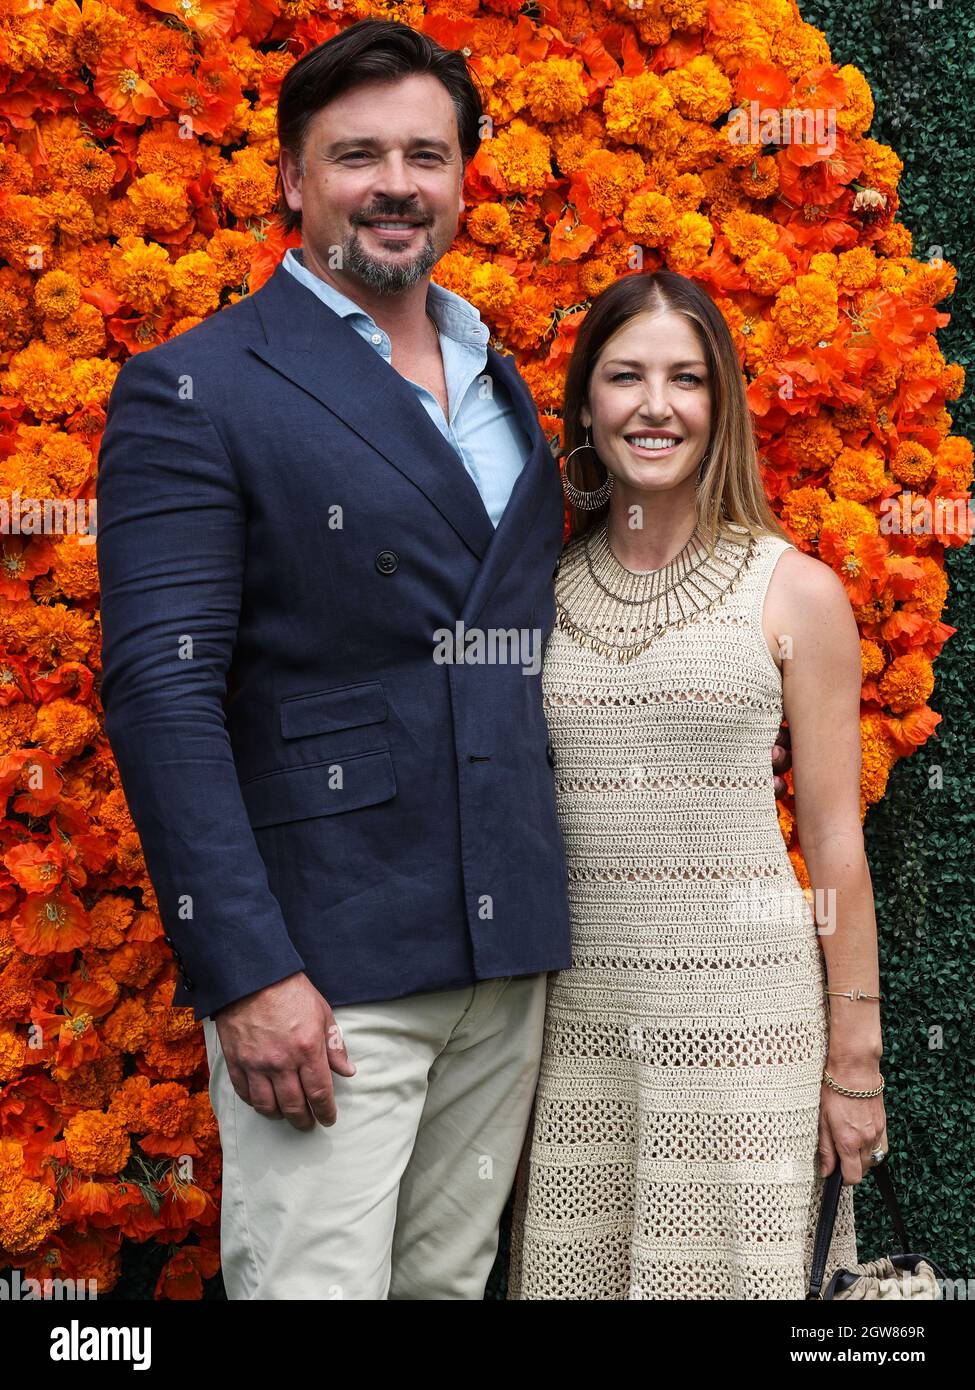 PACIFIC PALISADES, LOS ANGELES, CALIFORNIA, USA - OCTOBER 02: Actor Tom Welling and wife Jessica Rose Lee Welling arrive at the Veuve Clicquot Polo Classic Los Angeles 2021 held at the Will Rogers State Historic Park on October 2, 2021 in Pacific Palisades, Los Angeles, California, United States. (Photo by Xavier Collin/Image Press Agency/Sipa USA) Stock Photo